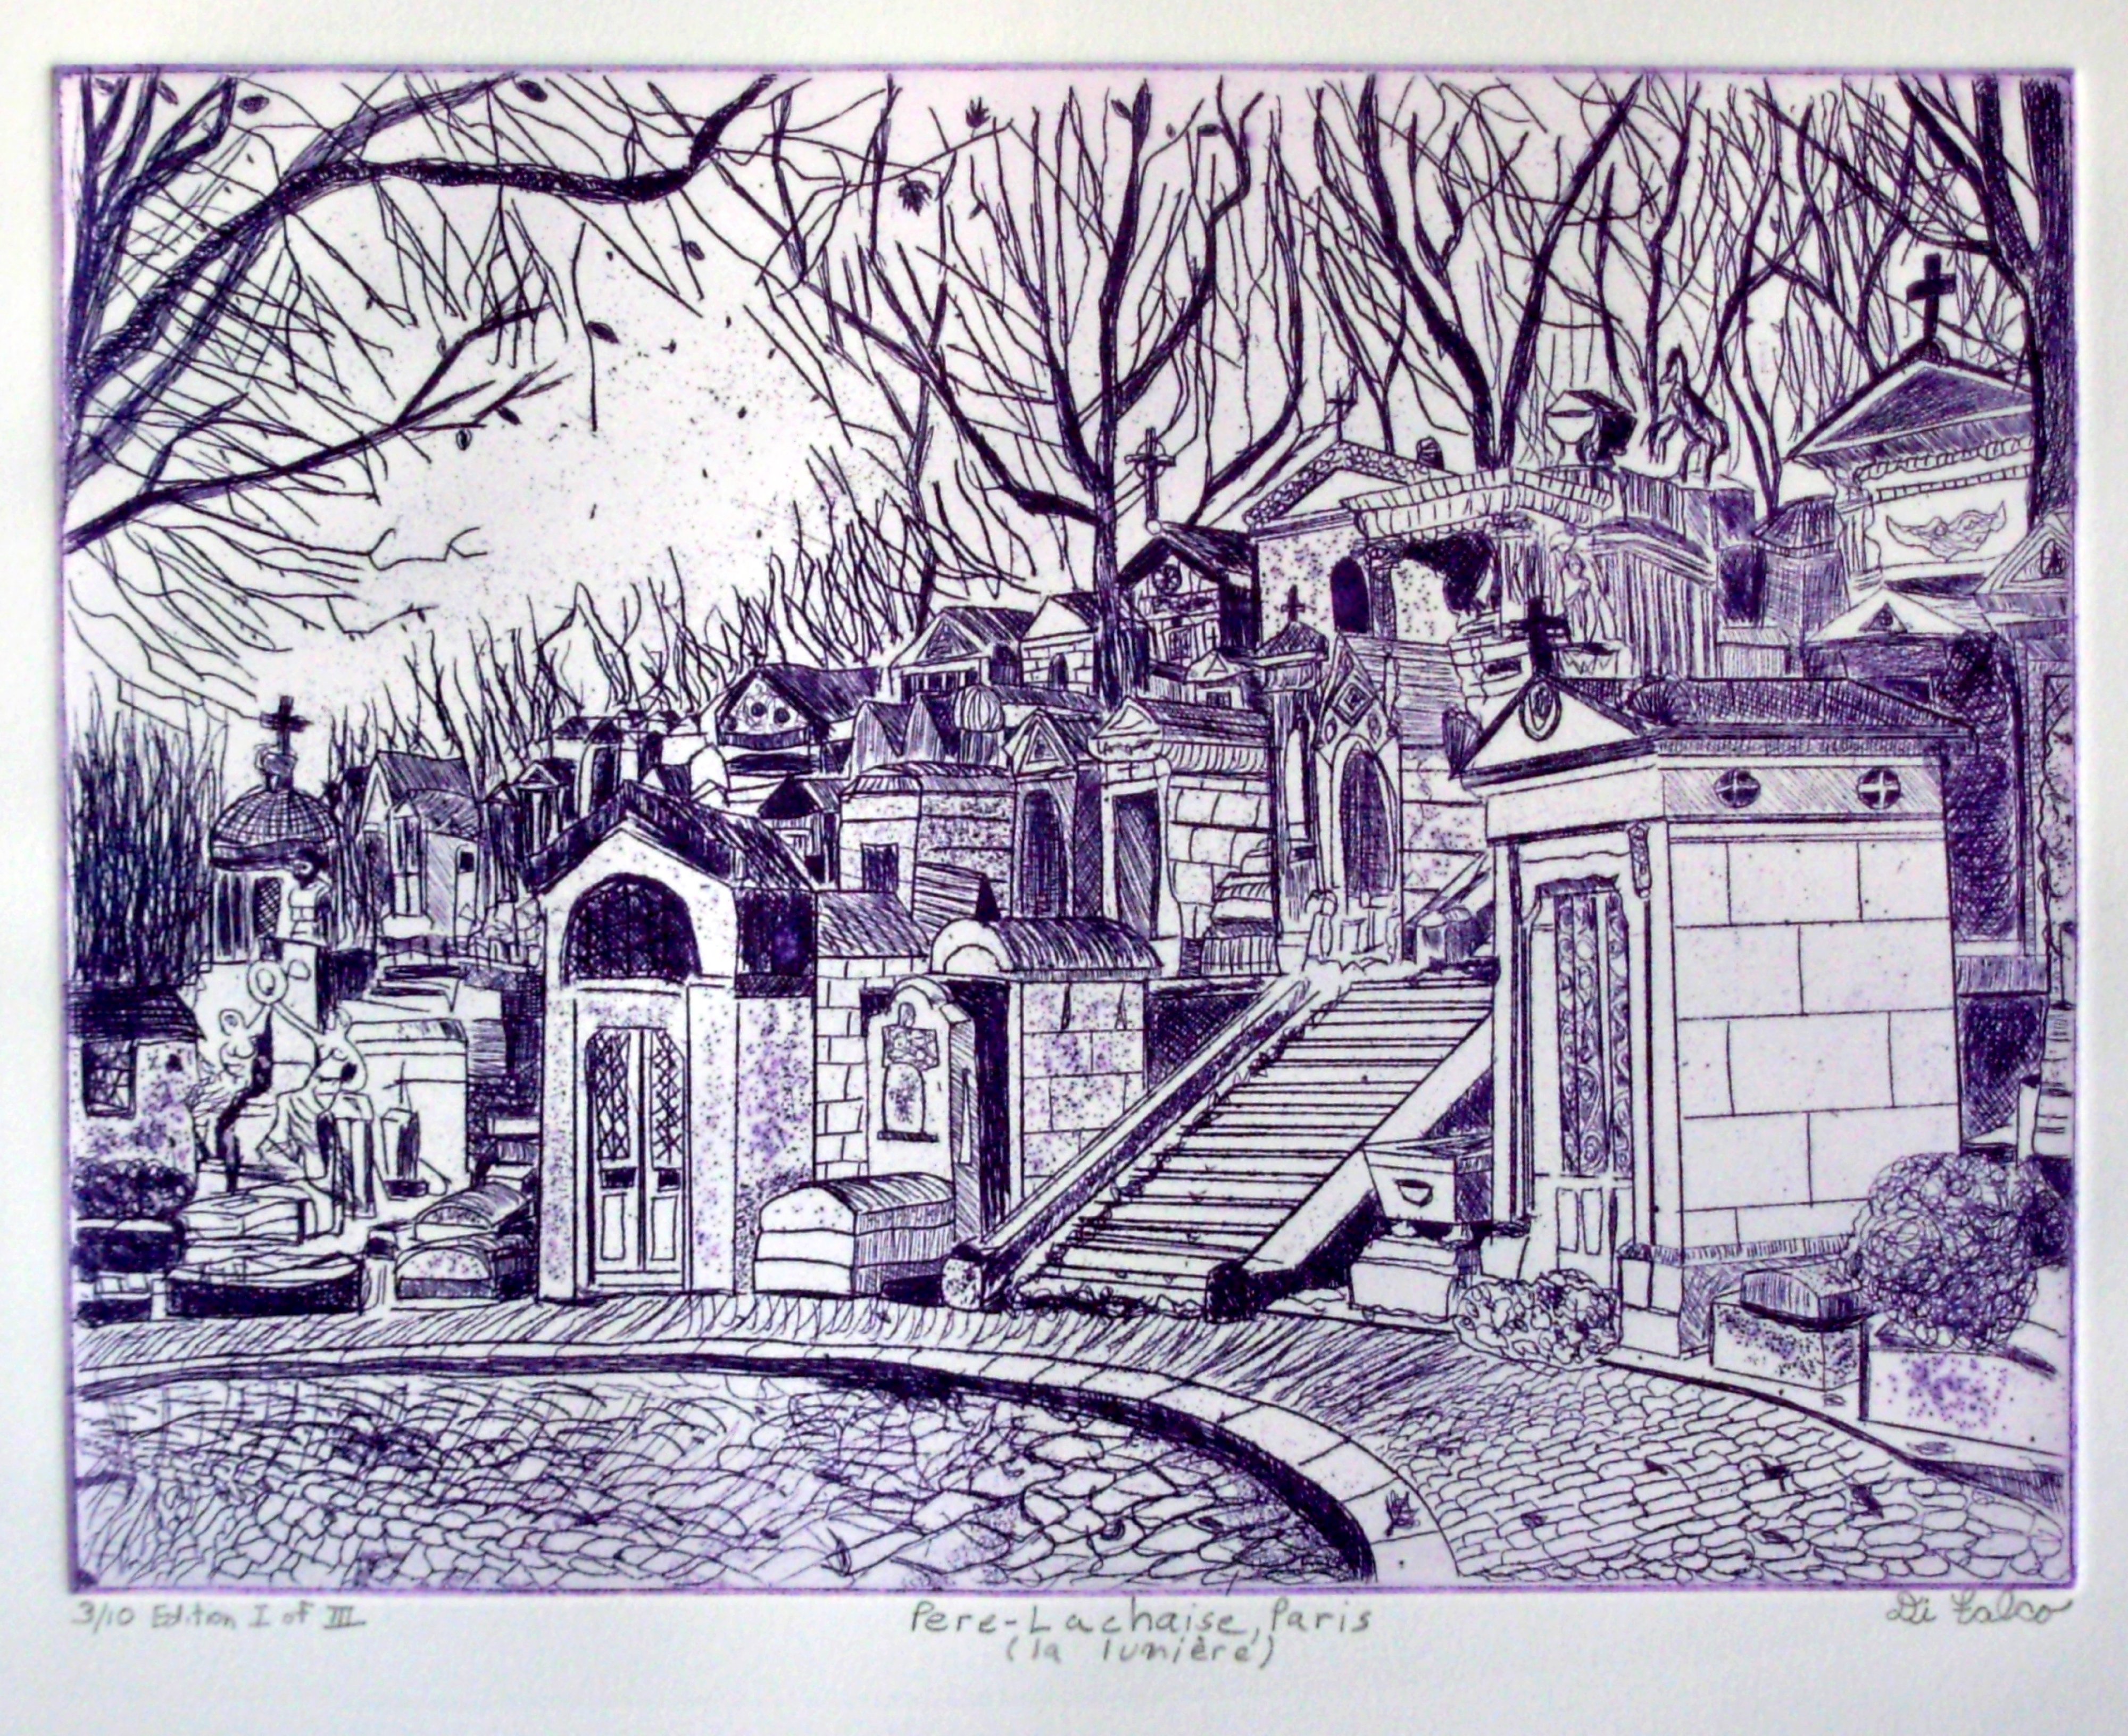 Jerry  Di Falco, 'PERE LACHAISE IN PARIS  ', 2012, original Printmaking Etching, 18 x 15  x 0.5 inches. Artwork description: 13791 I photographed this Paris scene in 1987 at the Pere Lachaise Cemetery. This etching is from the second edition of ten, which uses an oil base ink blend, Charbonnel brand, on RivesBFK white printmaking paper. My studio techniques included intaglio, mezzotint, and aquatint. The image size measures ...